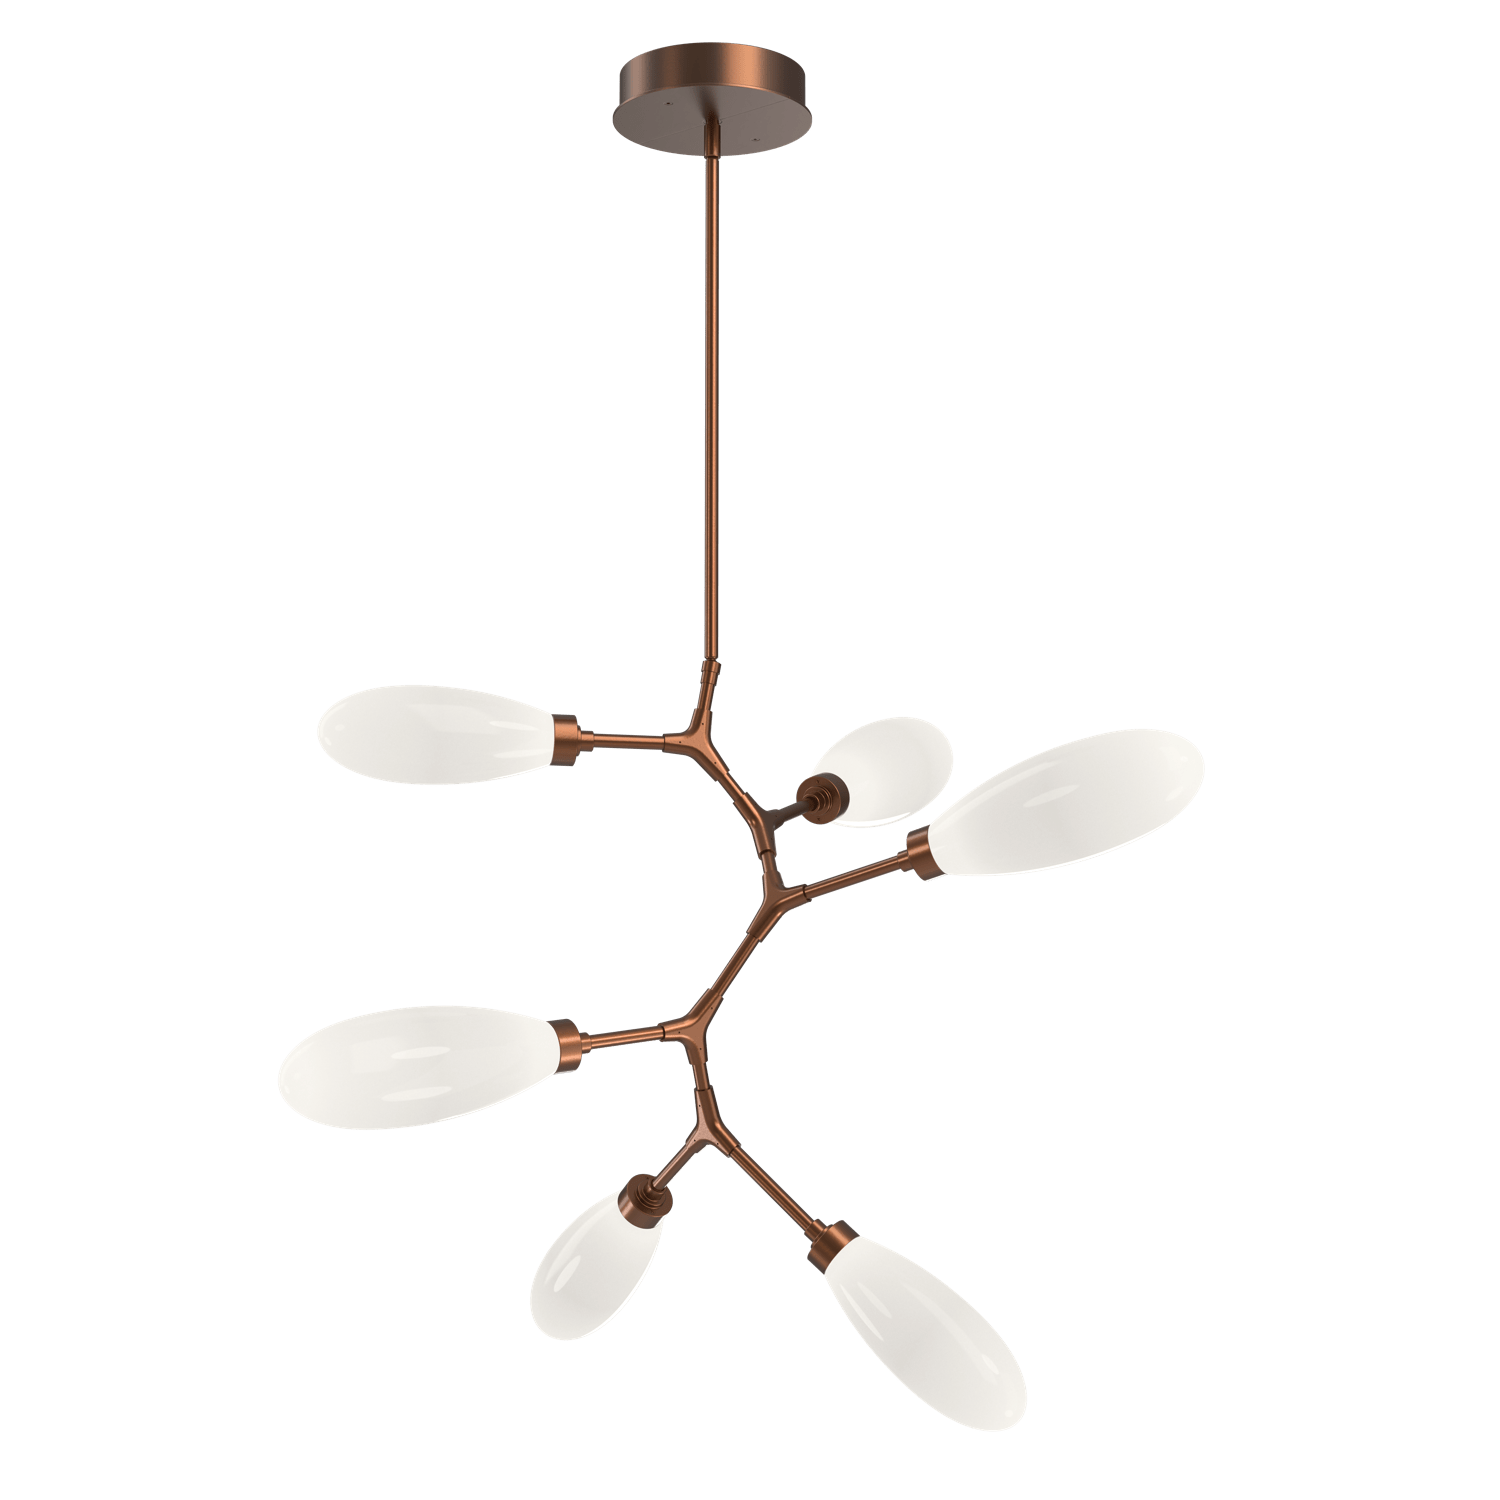 CHB0071-VA-BB-WL-LL-Hammerton-Studio-Fiori-6-light-organic-vine-chandelier-with-burnished-bronze-finish-and-opal-white-glass-shades-and-LED-lamping